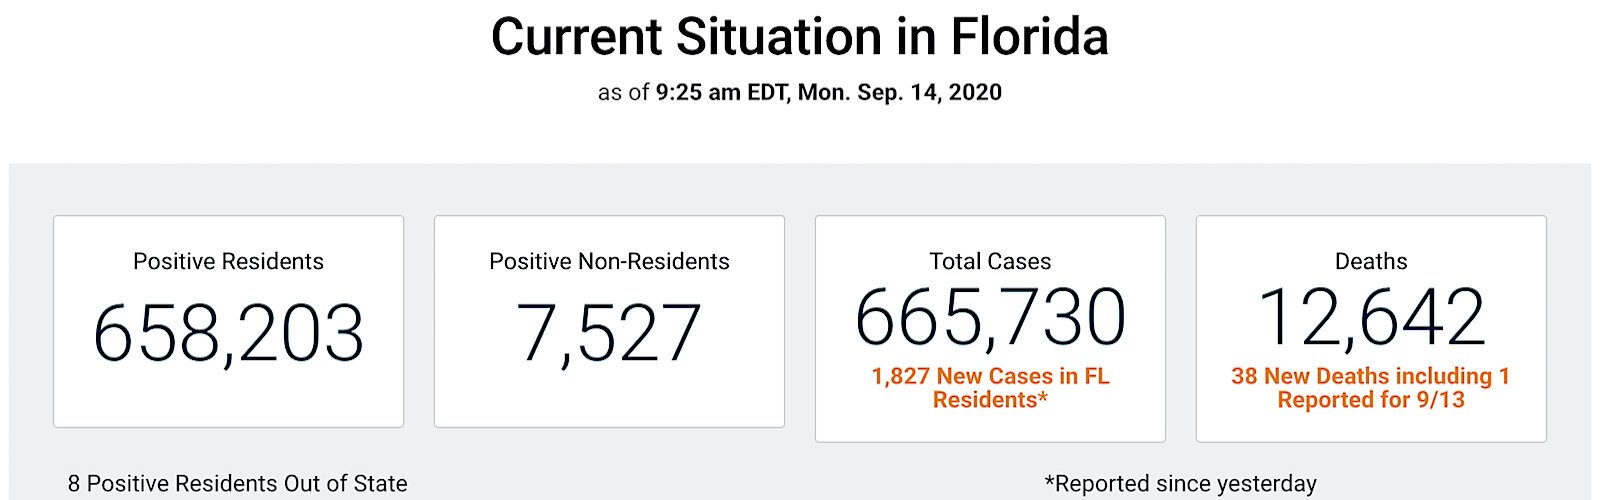 COVID-19 cases in Florida as of Sept. 14, 2020.